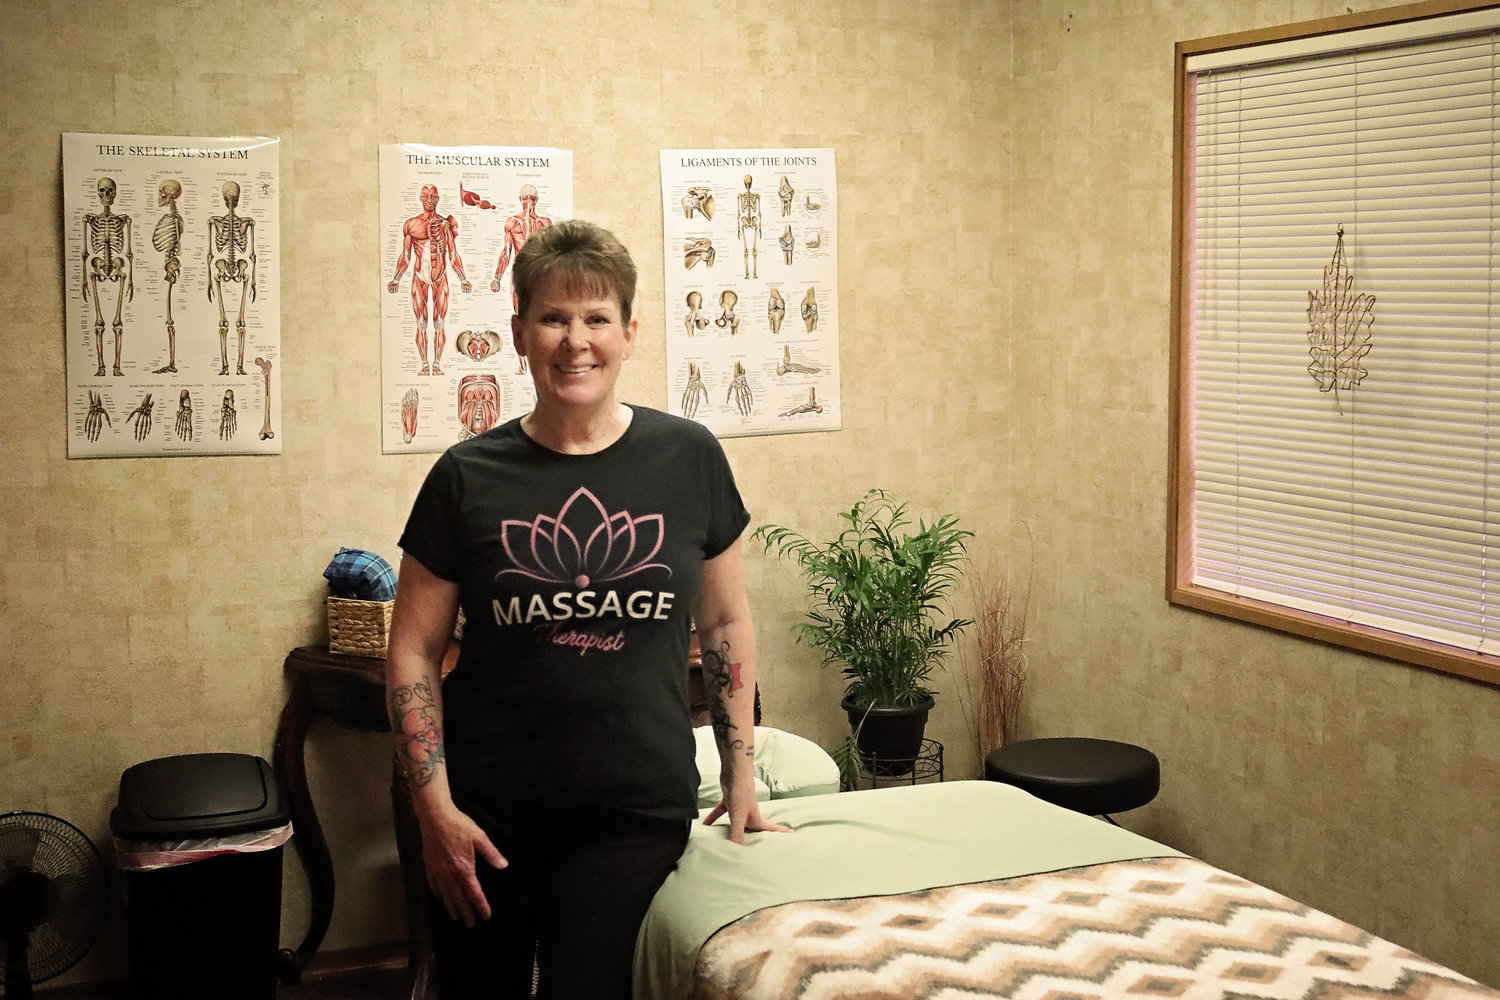 The owner, Leah Vanasse, a licensed massage therapist, is a recent graduate of the Bodymechanics School of Myotherapy and Massage in Tumwater.